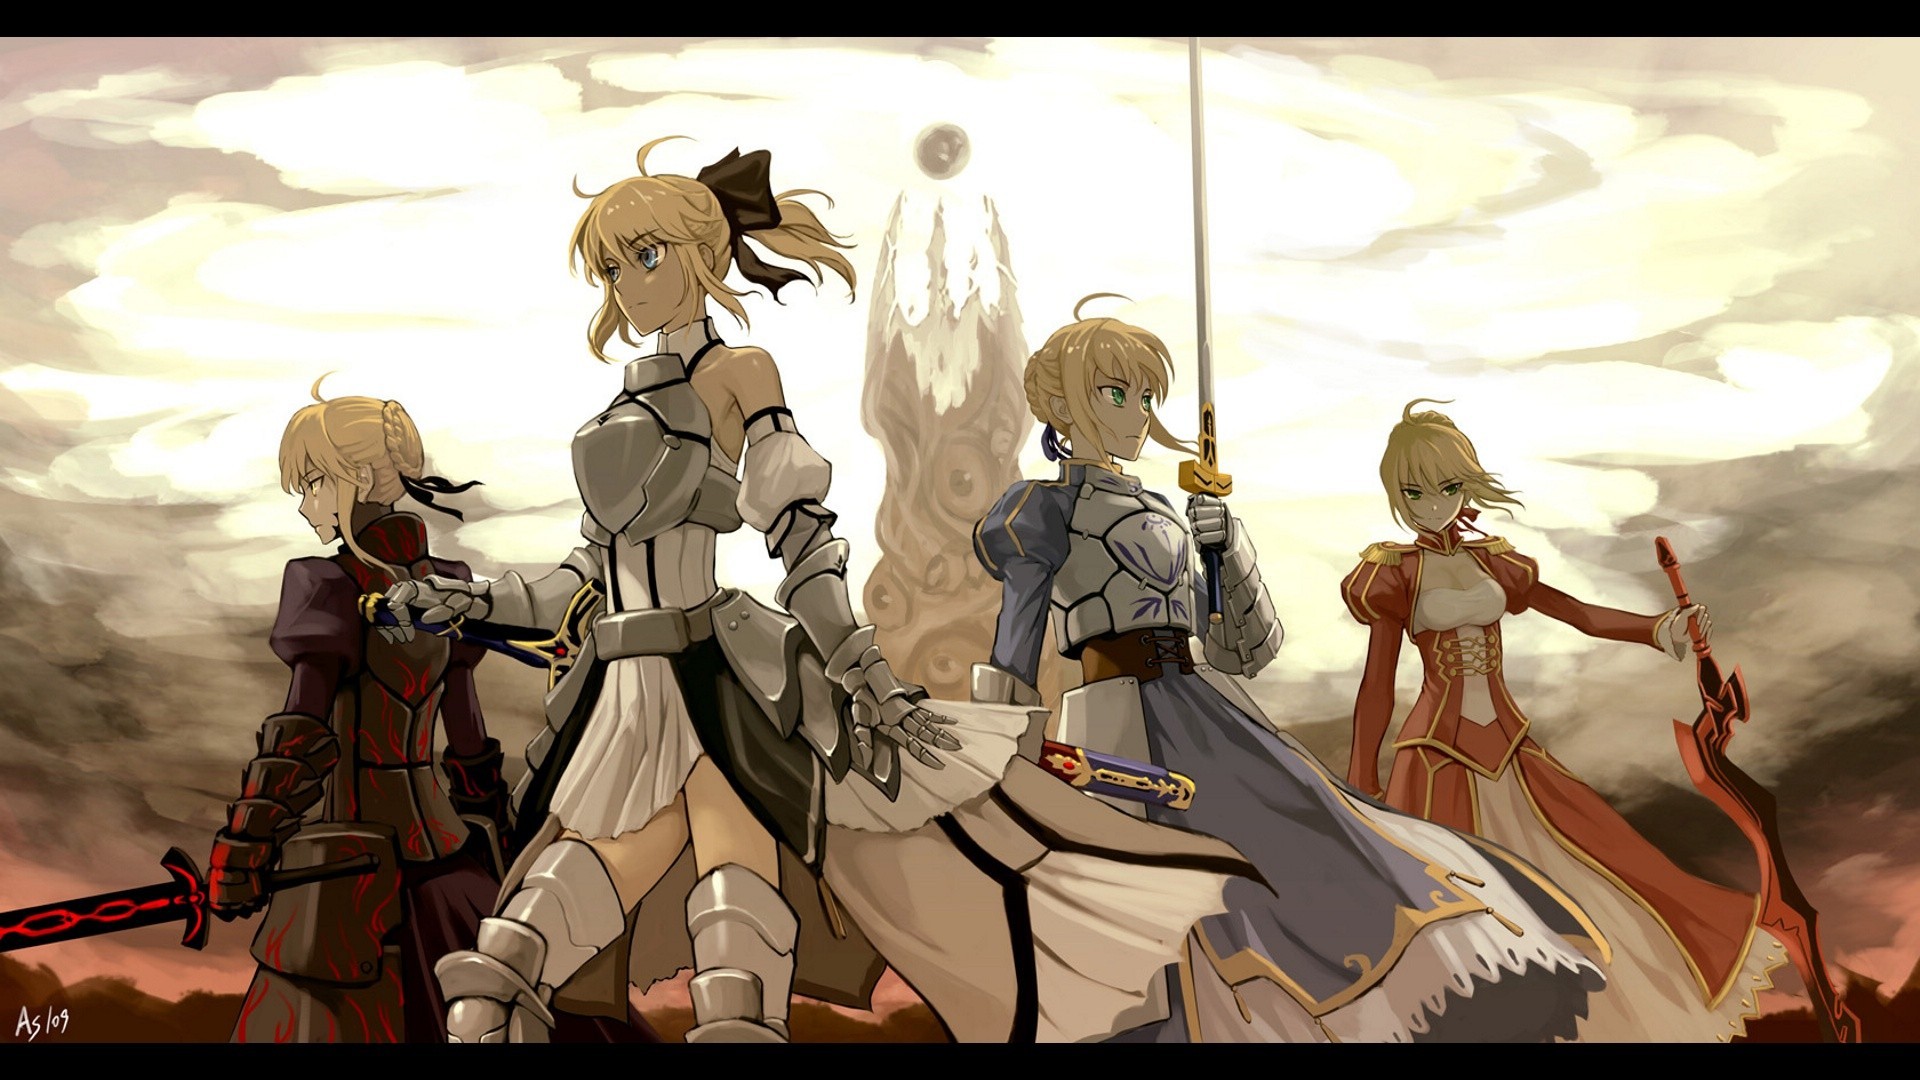 Anime 1920x1080 Fate/Zero Fate series Fate/Stay Night Saber anime Saber Alter Saber Lily anime girls Fate/Extra Fate/Extra CCC Artoria Pendragon Nero Claudius blonde armor sword dress As109 Fate/Grand Order Fate/Unlimited Codes 